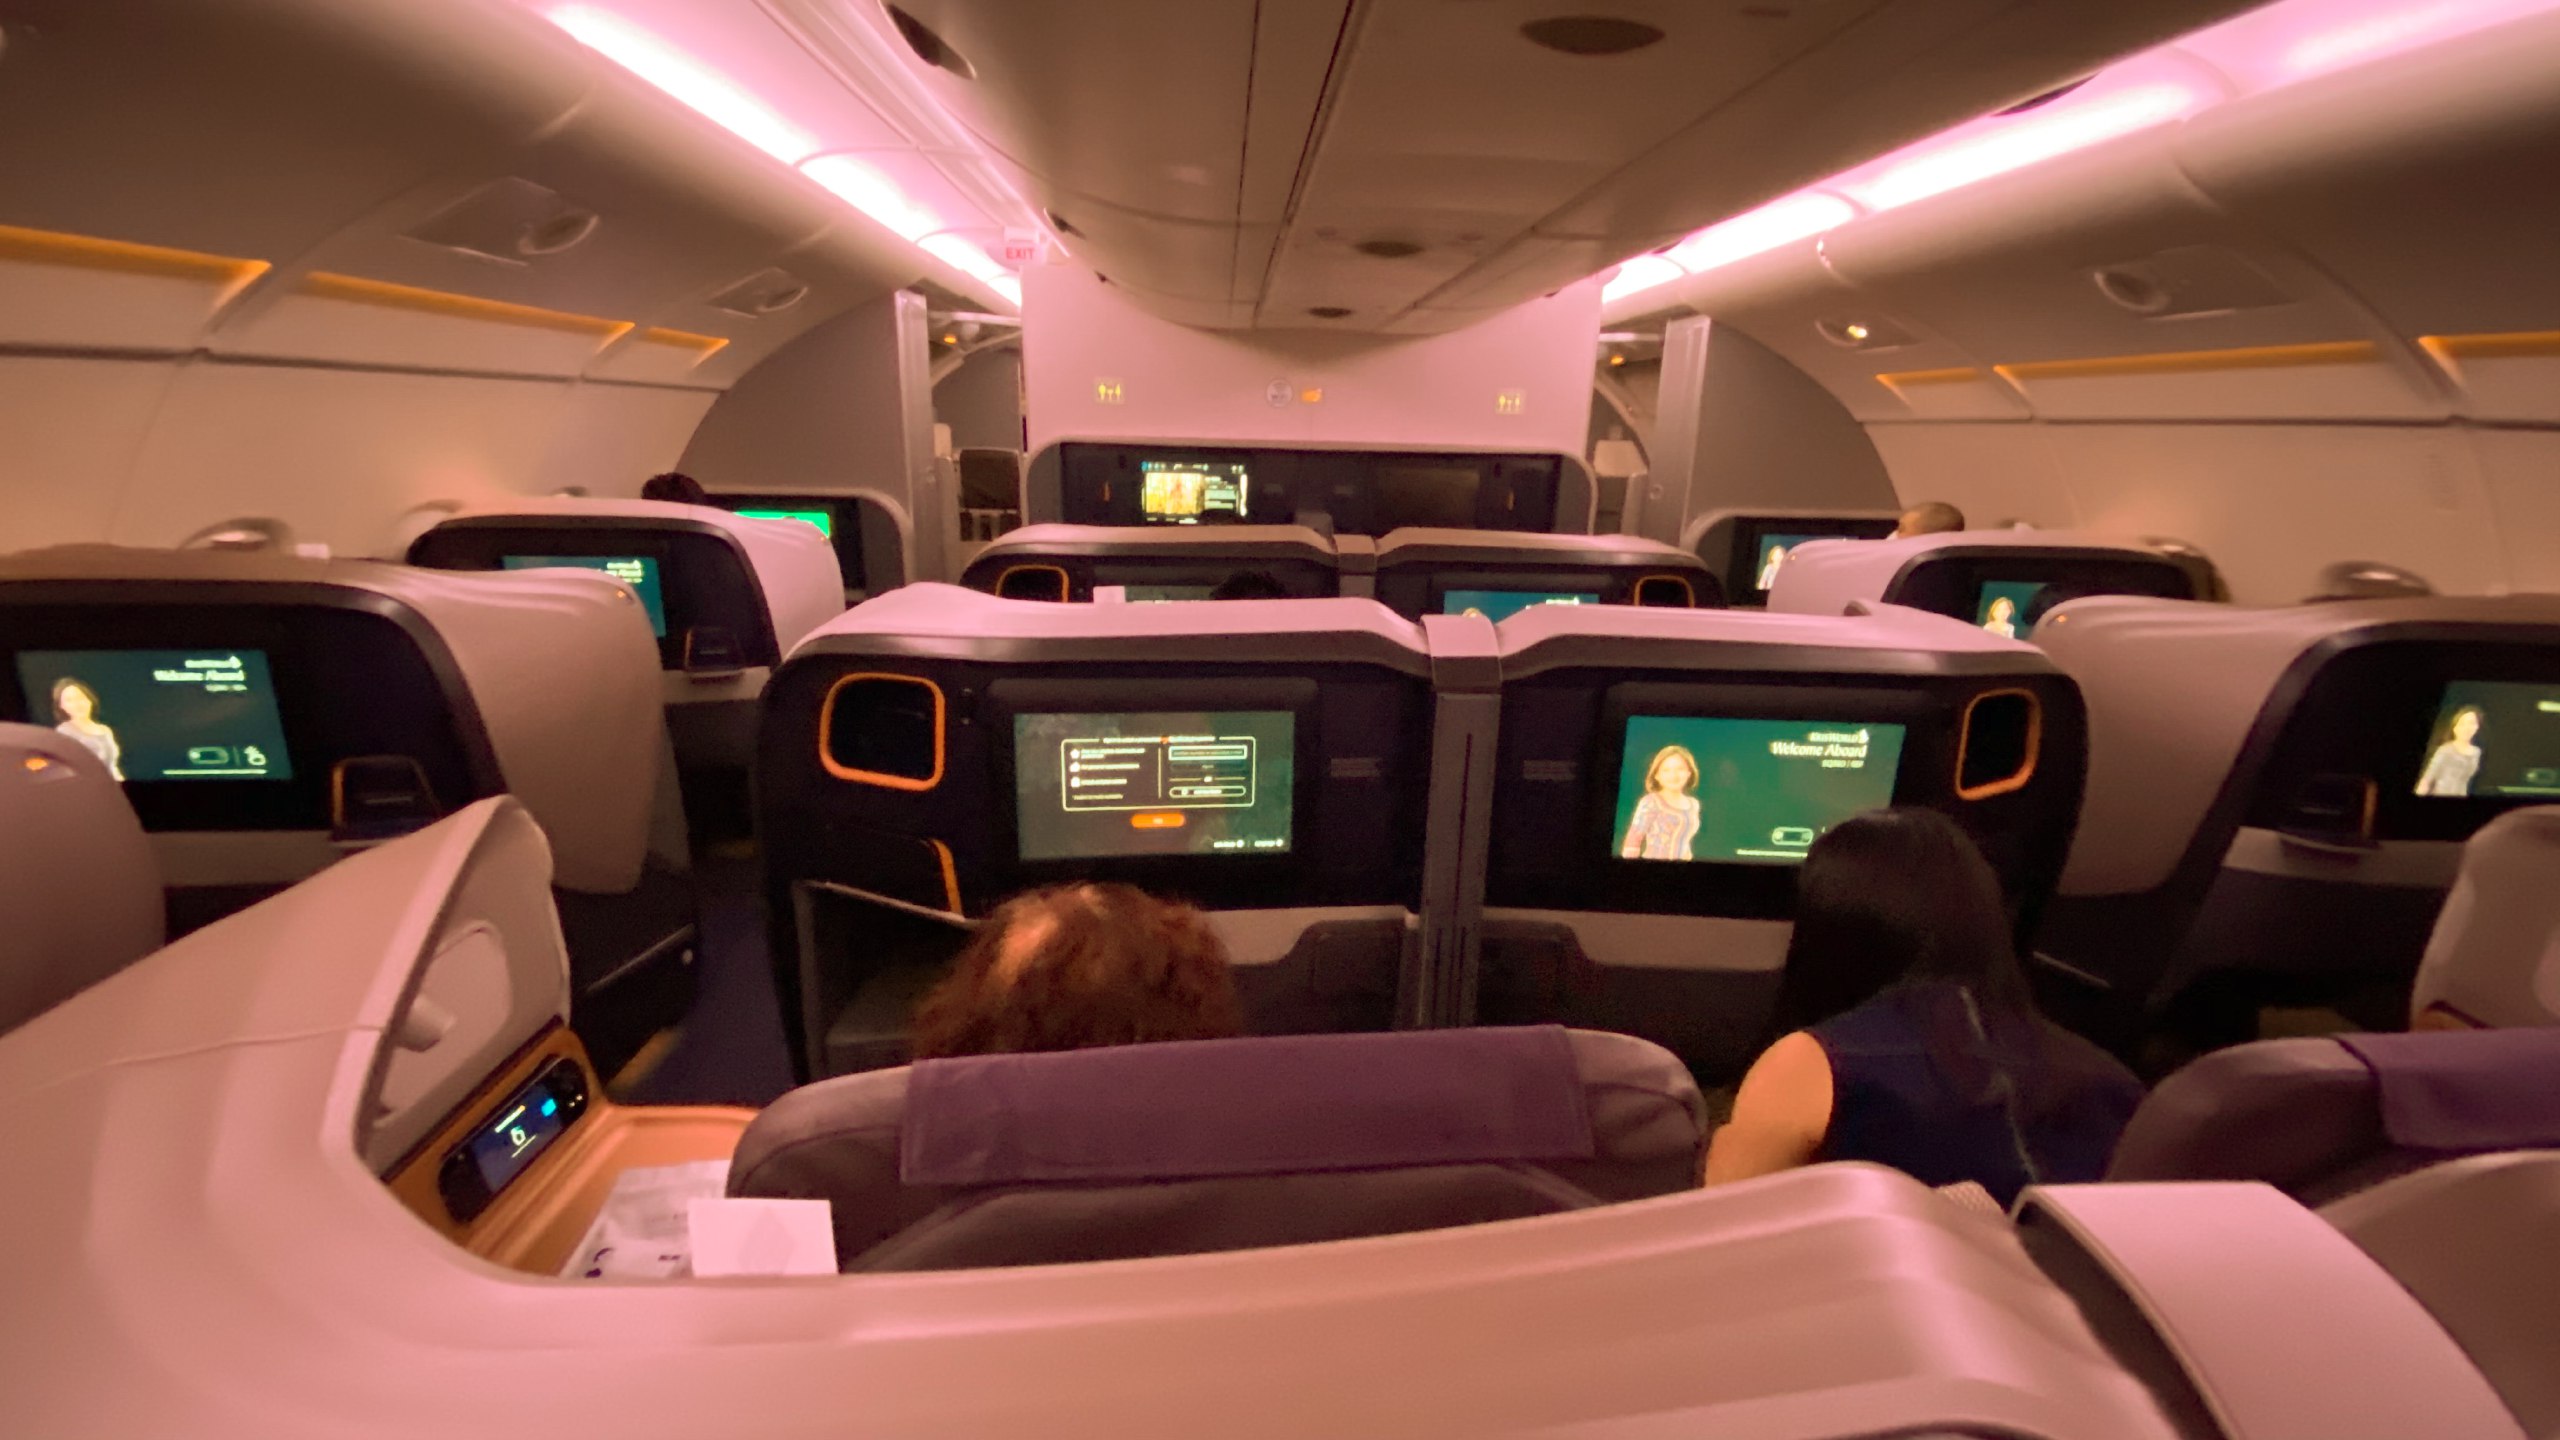 The Business Class seats. Photo: Coconuts